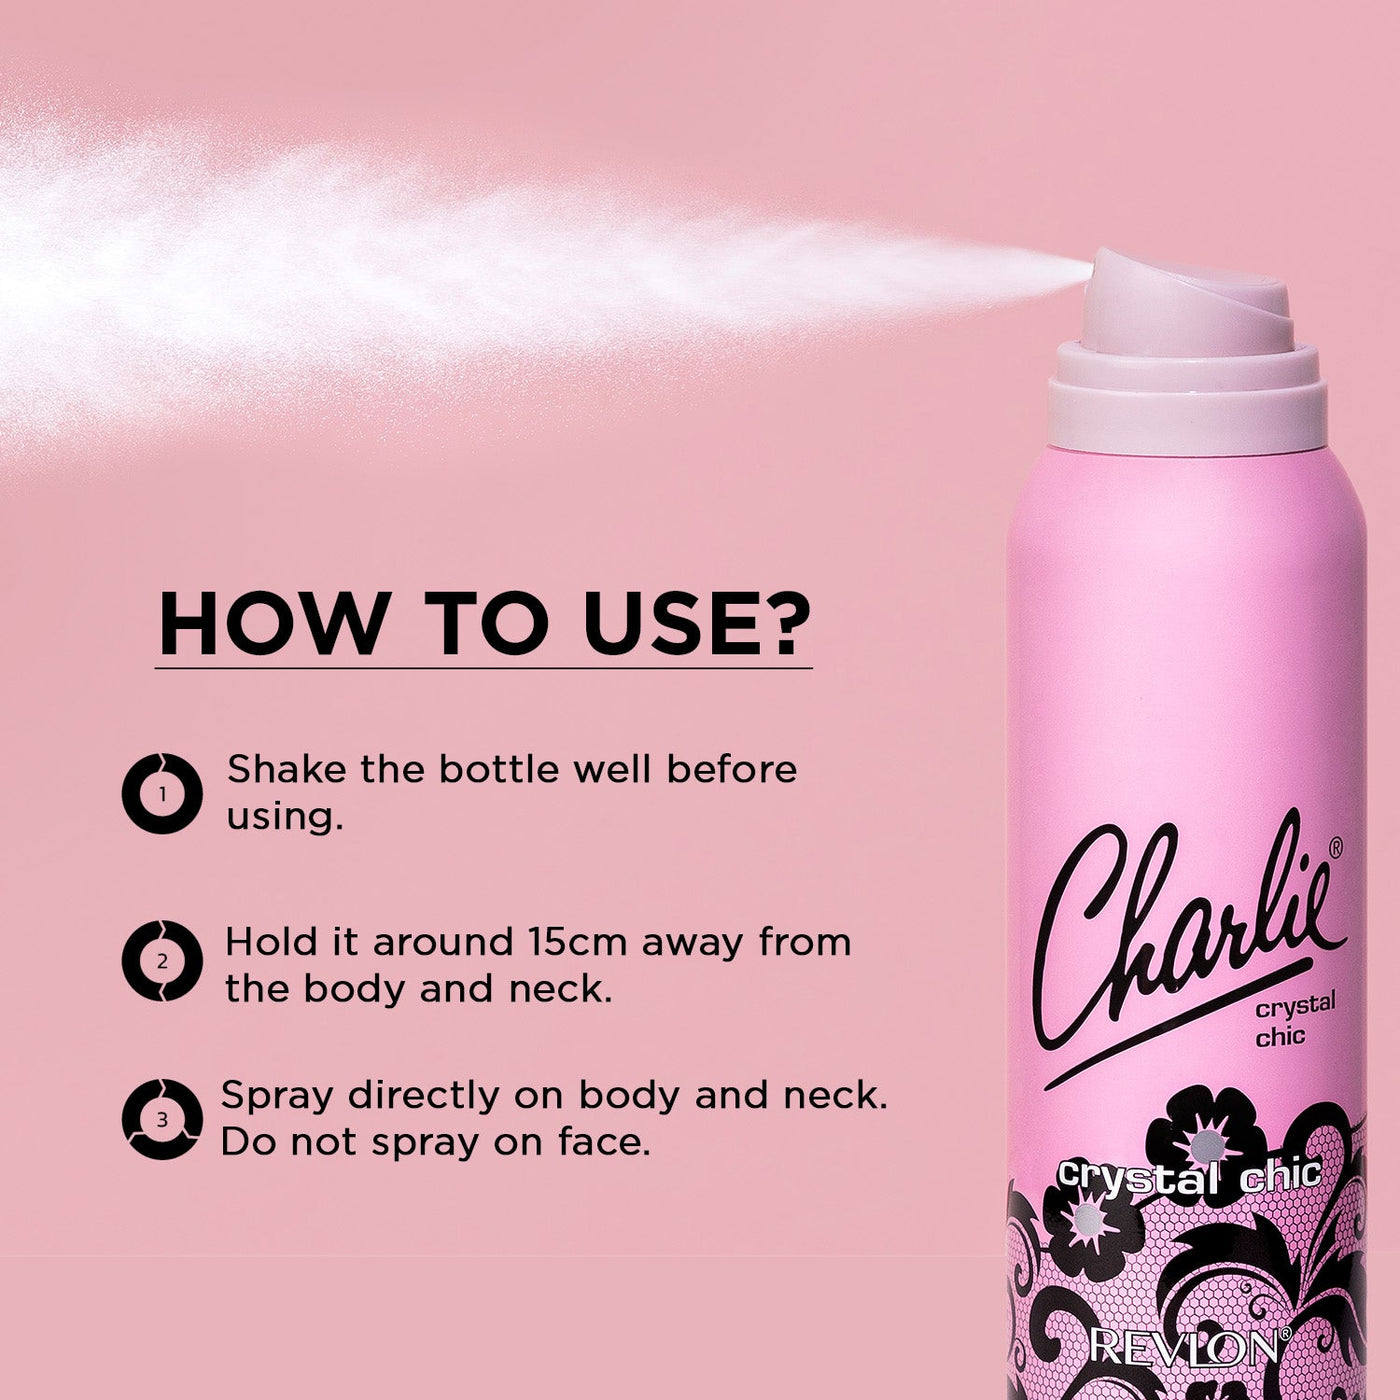 Charlie Crystal Chic Perfumed Body Spray - Special Offers